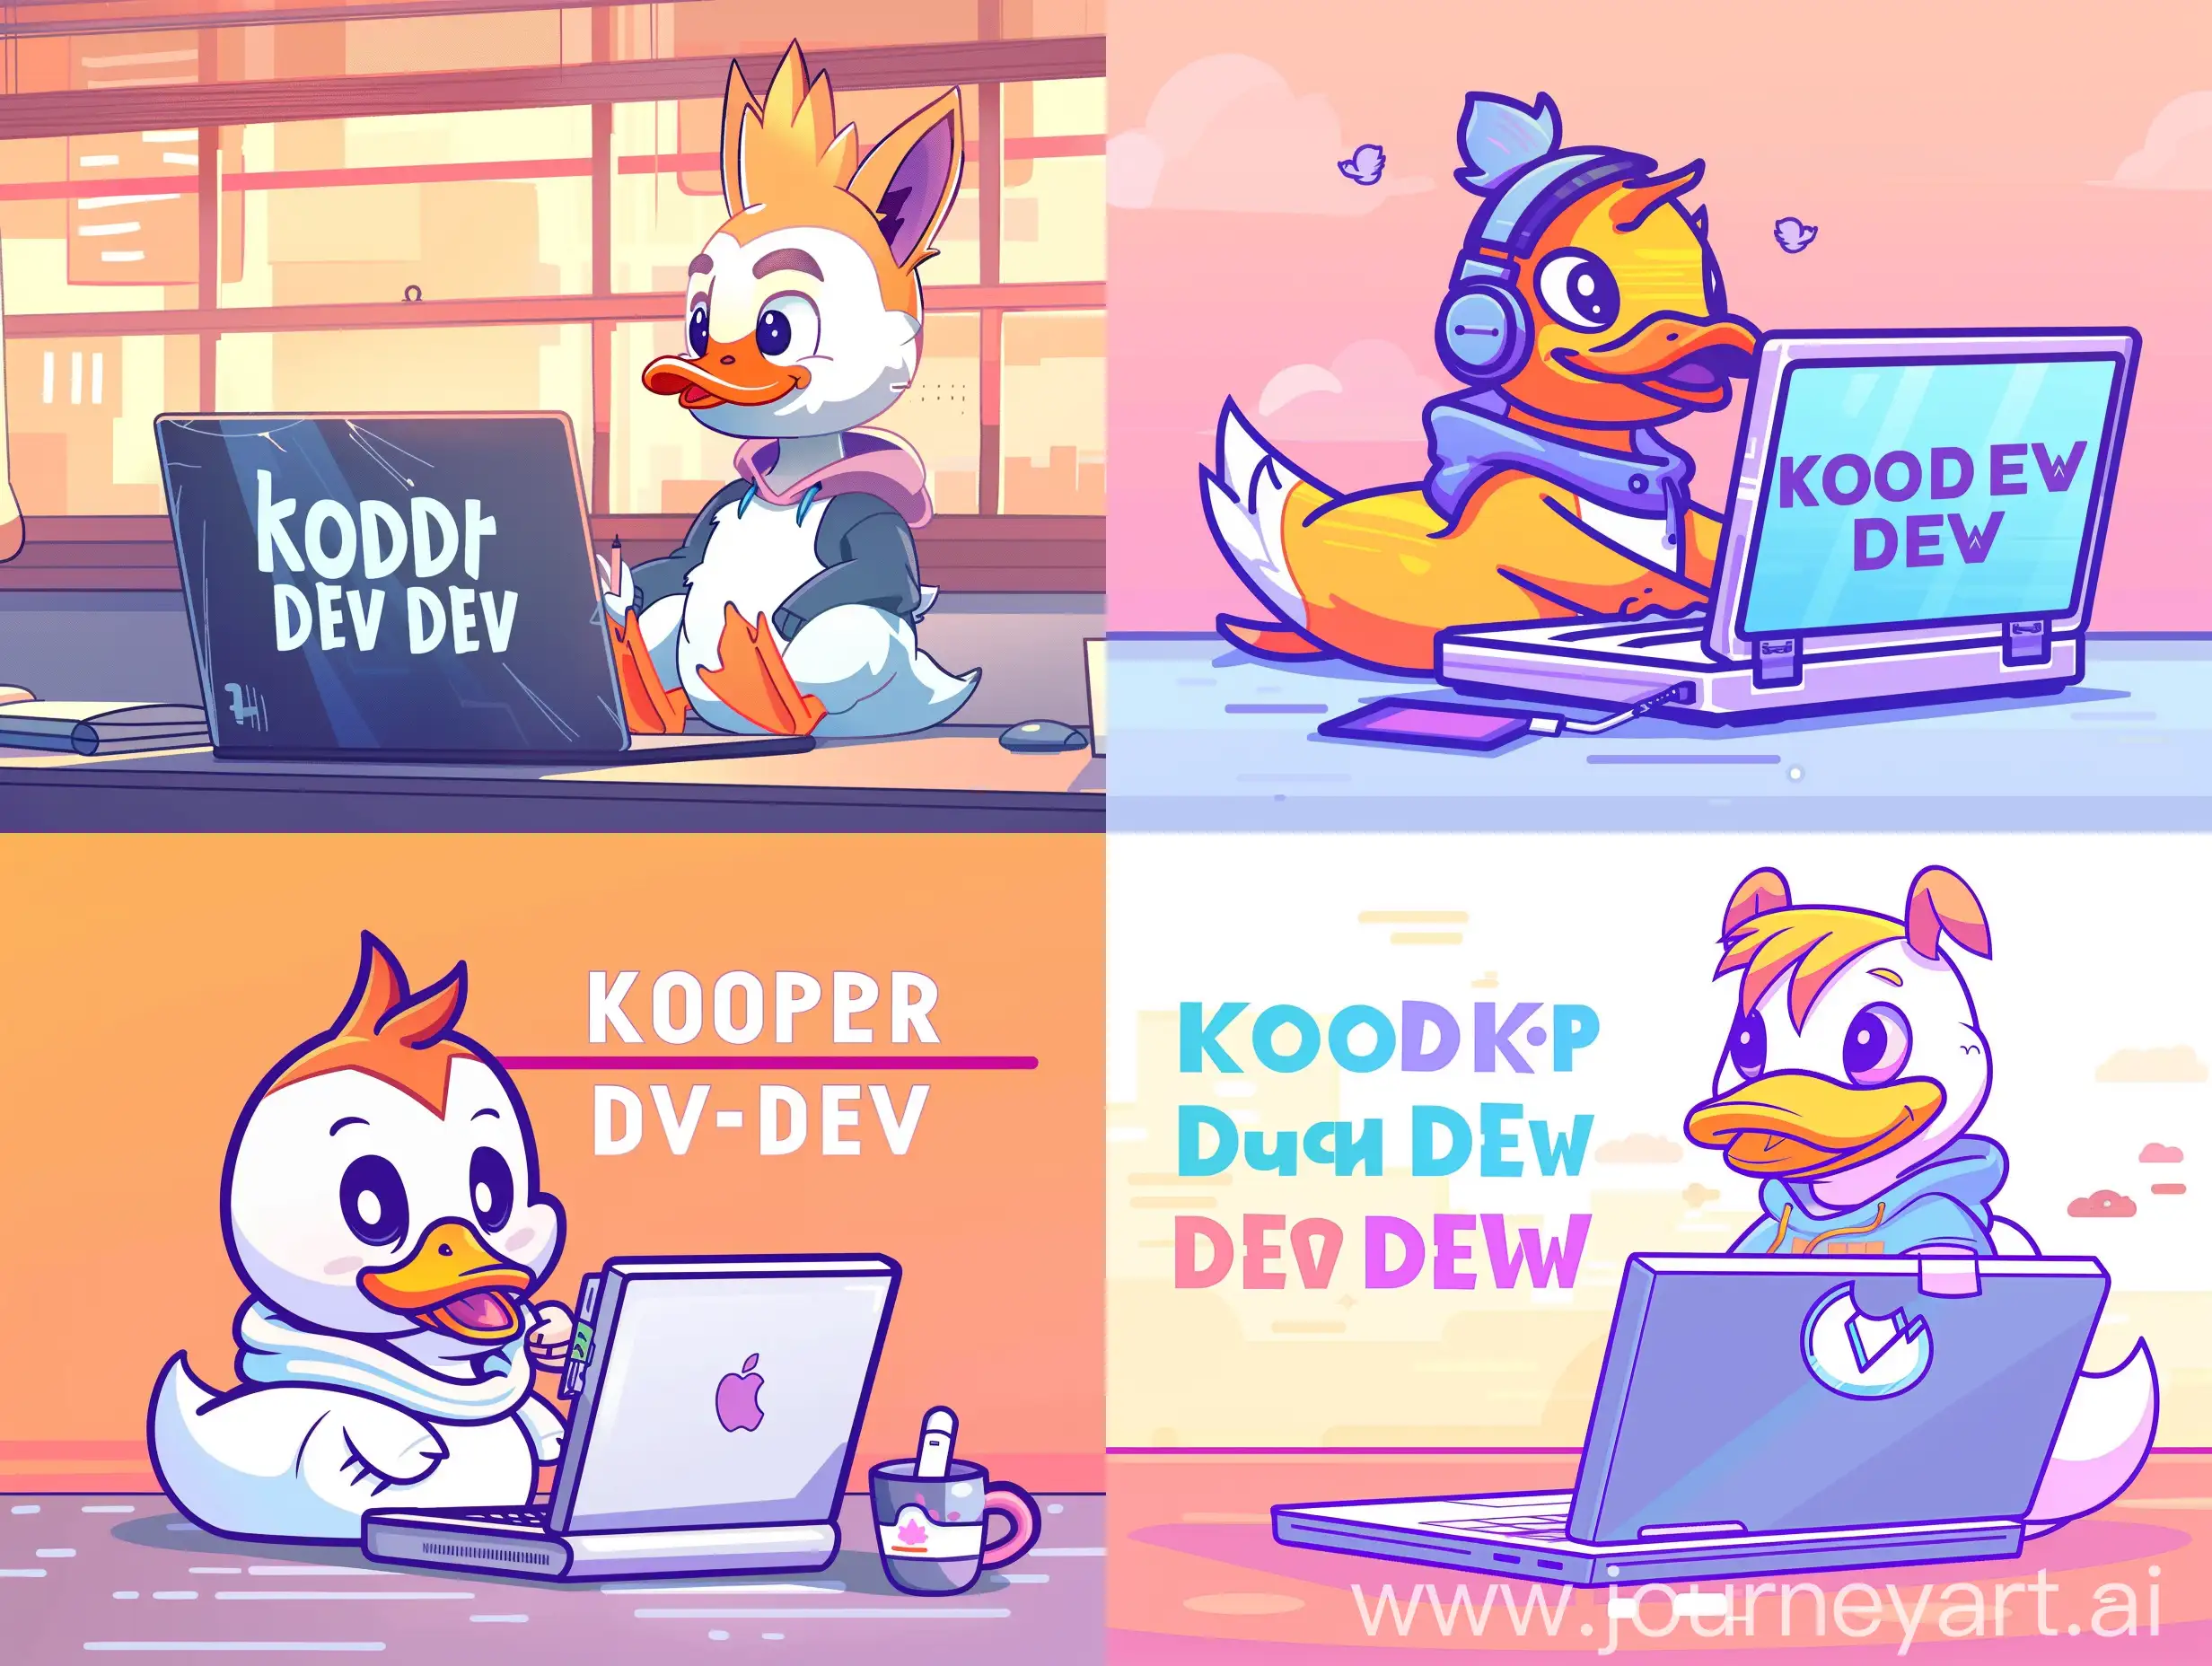 colorful and attracting ads picture, cute duck hacker sitting in front of laptop, "кодер Duck Dev" text, large very big font text size, cute cartoony style